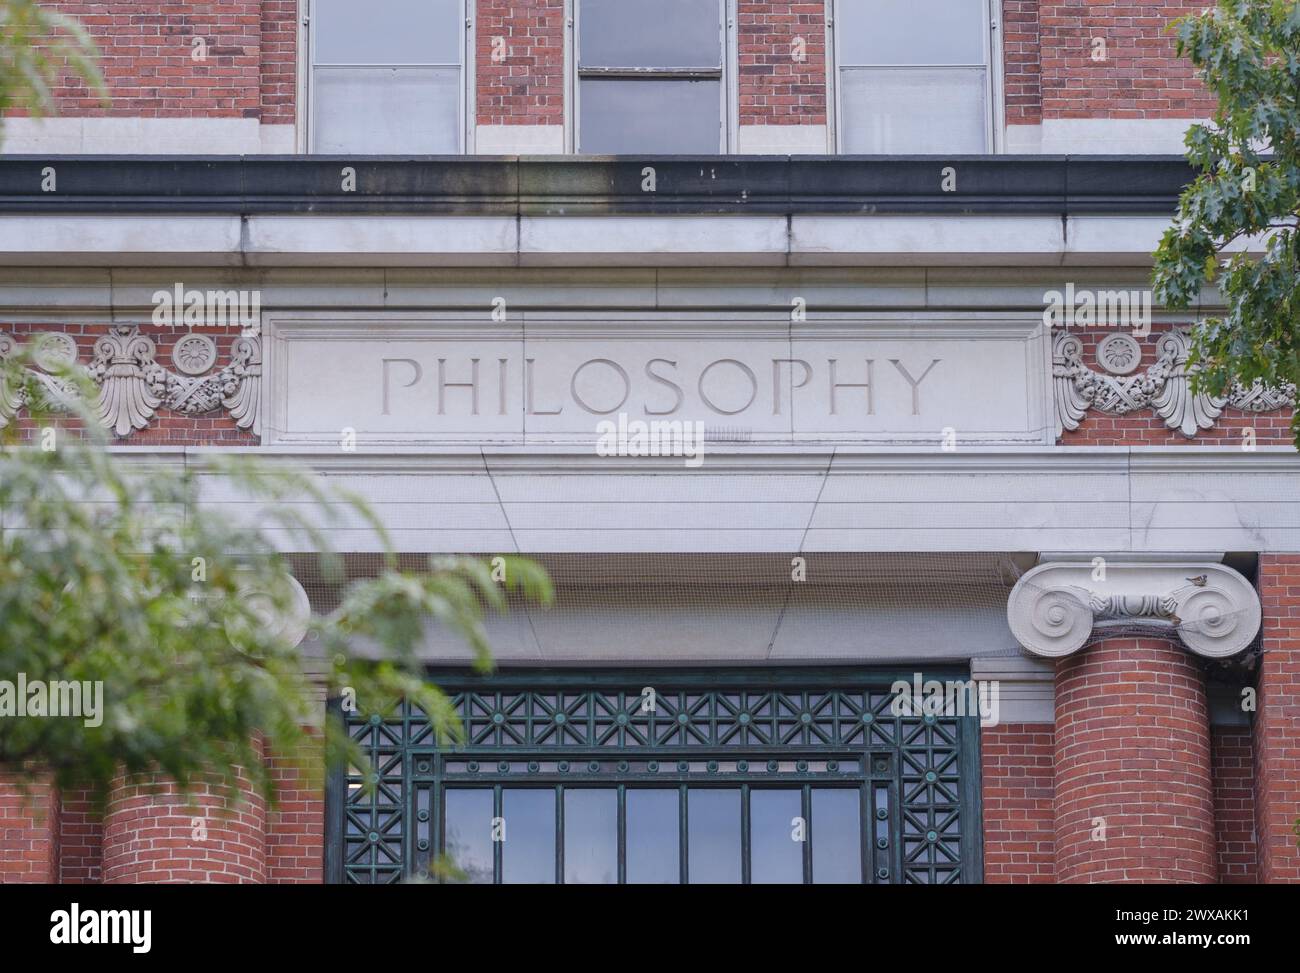 A Philosophy Department Building At An Ivy League University In The USA Stock Photo